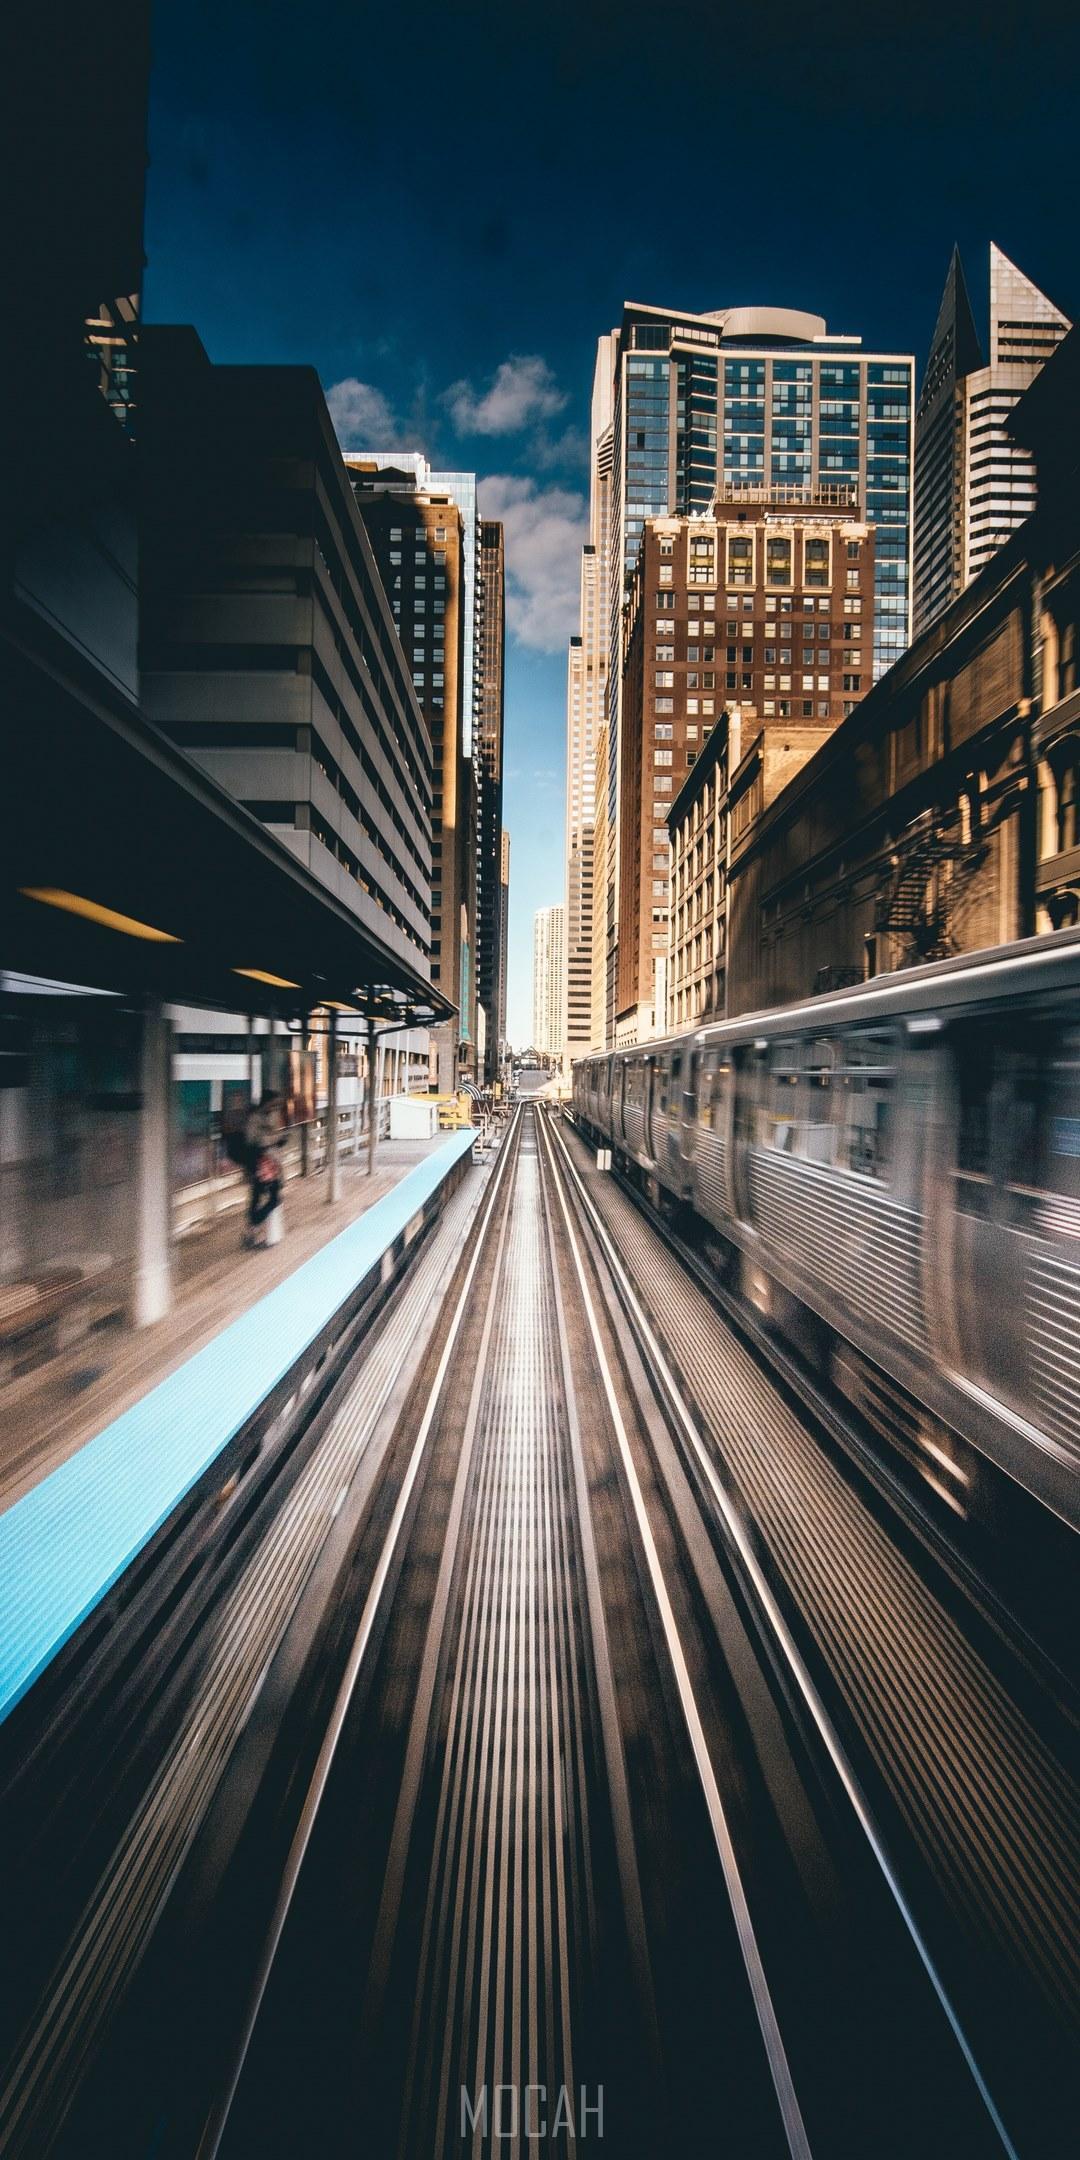 HD wallpaper, Motorola Moto X5 Wallpaper Hd, 1080X2160, A Blurred Image Showing Trains Moving On An Outdoor Railway In Chicago, Train Station Action In Chicago